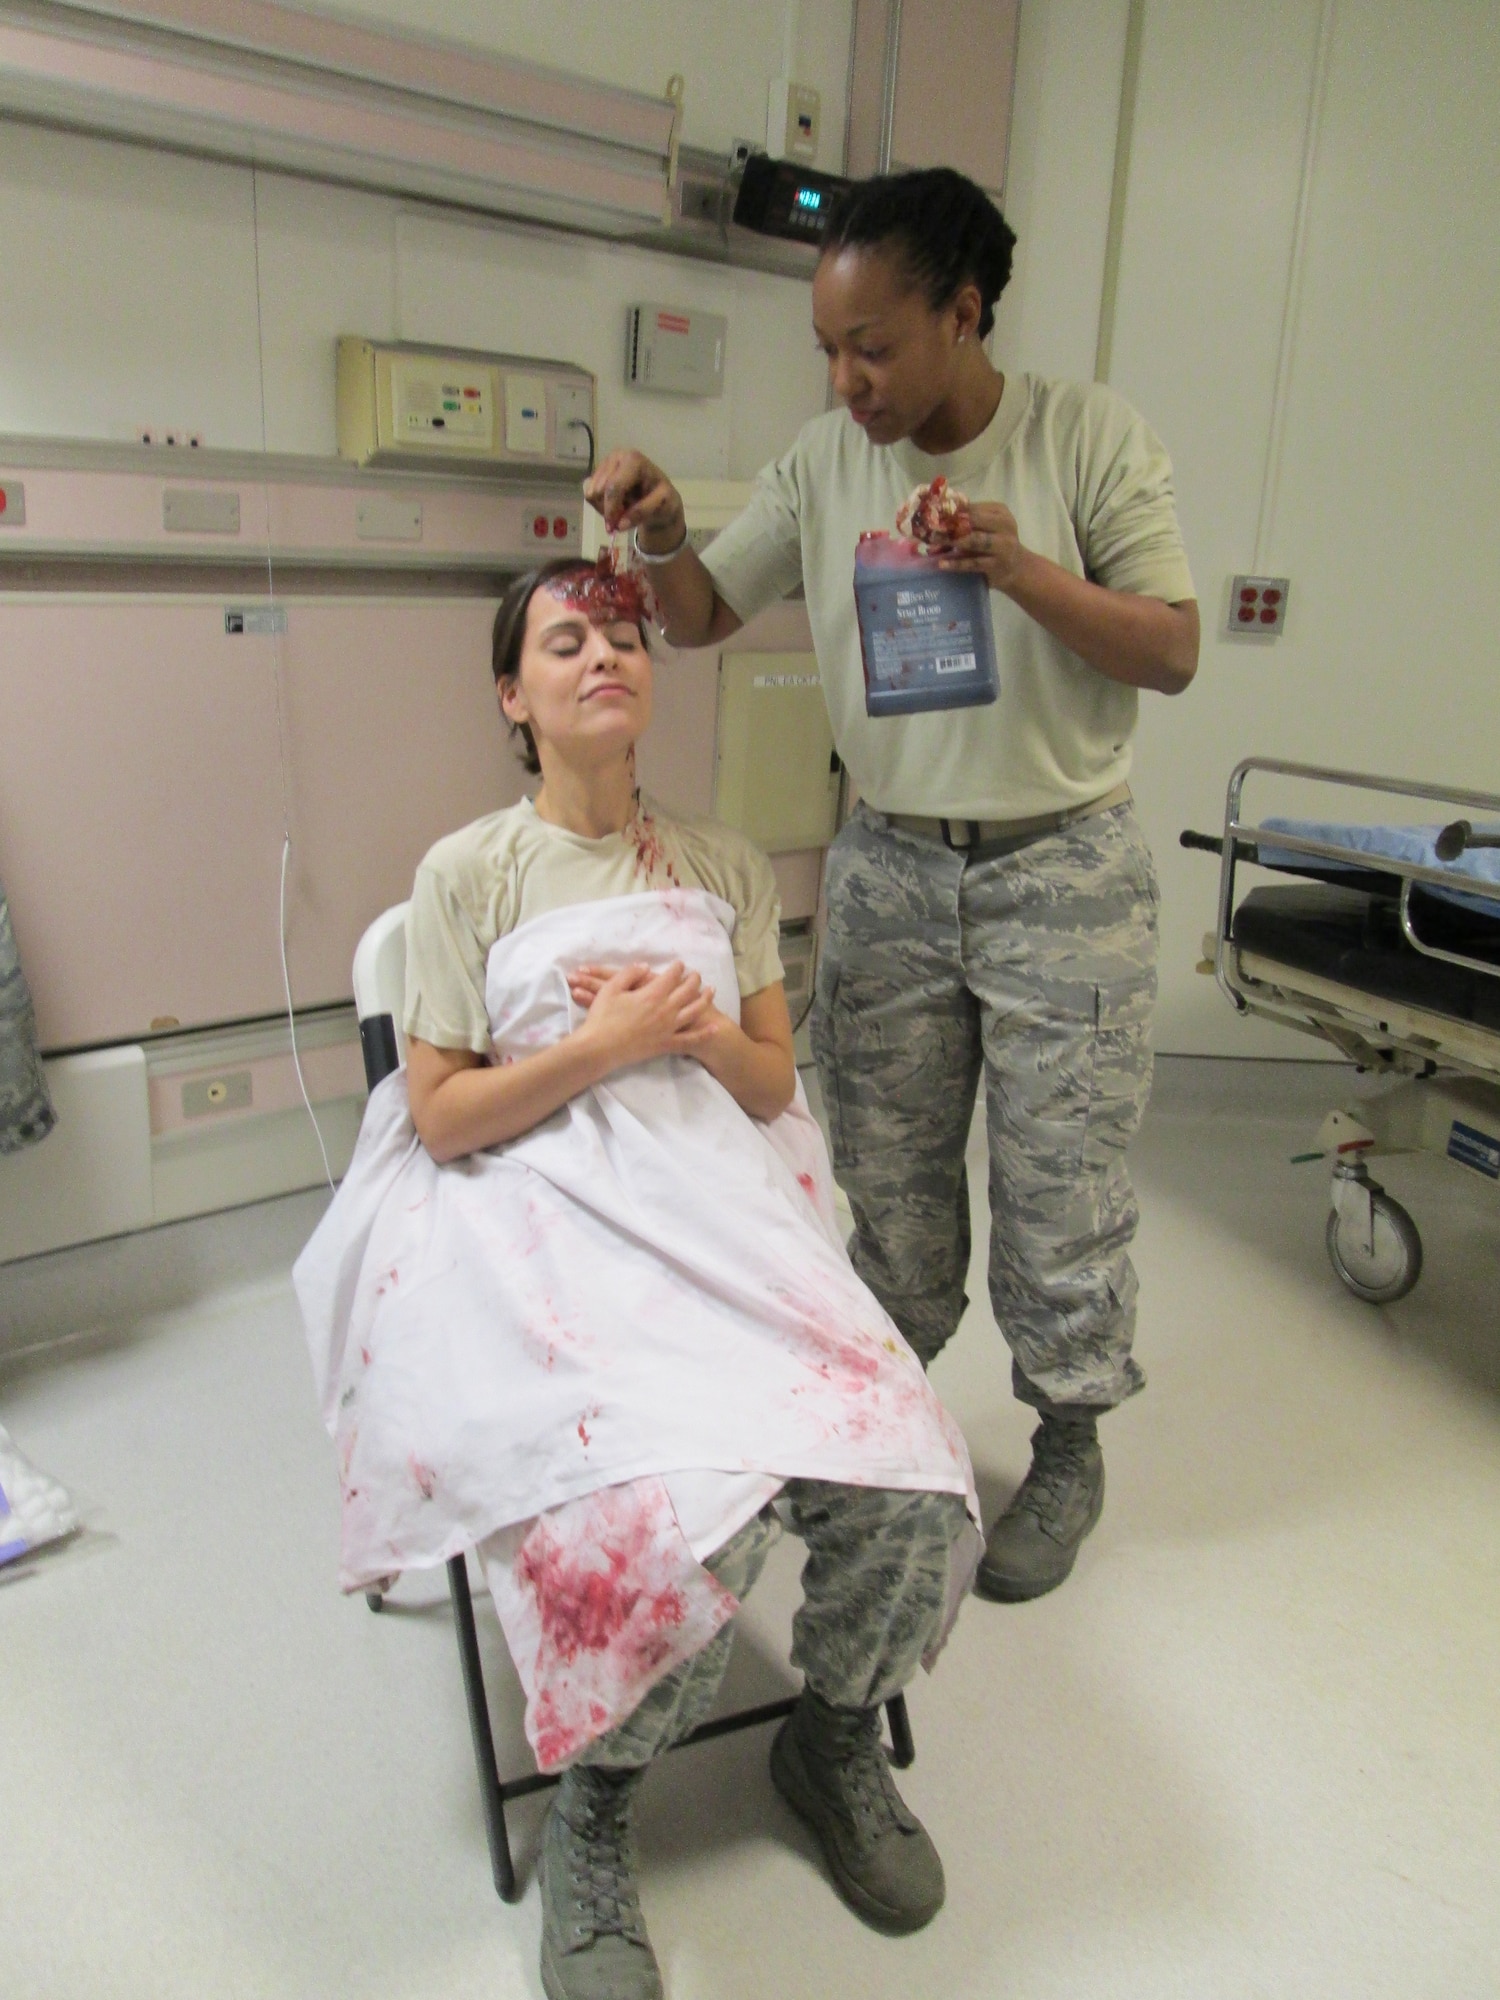 Tech Sgt. Erin Connolly (right) paints a moulage on Staff Sgt. Jennifer Cummings intended to simulated head trauma for a medical training held at Joint Base Andrews, January 10, 2013. The training is to prepare a medical team for their role in the 57th Presidential Inauguration as a medical response unit. Connolly is medical engineer and Cummings is a lab technician, both with the 79th Medical Wing. (U.S. Air Force Photo/Melanie Moore)